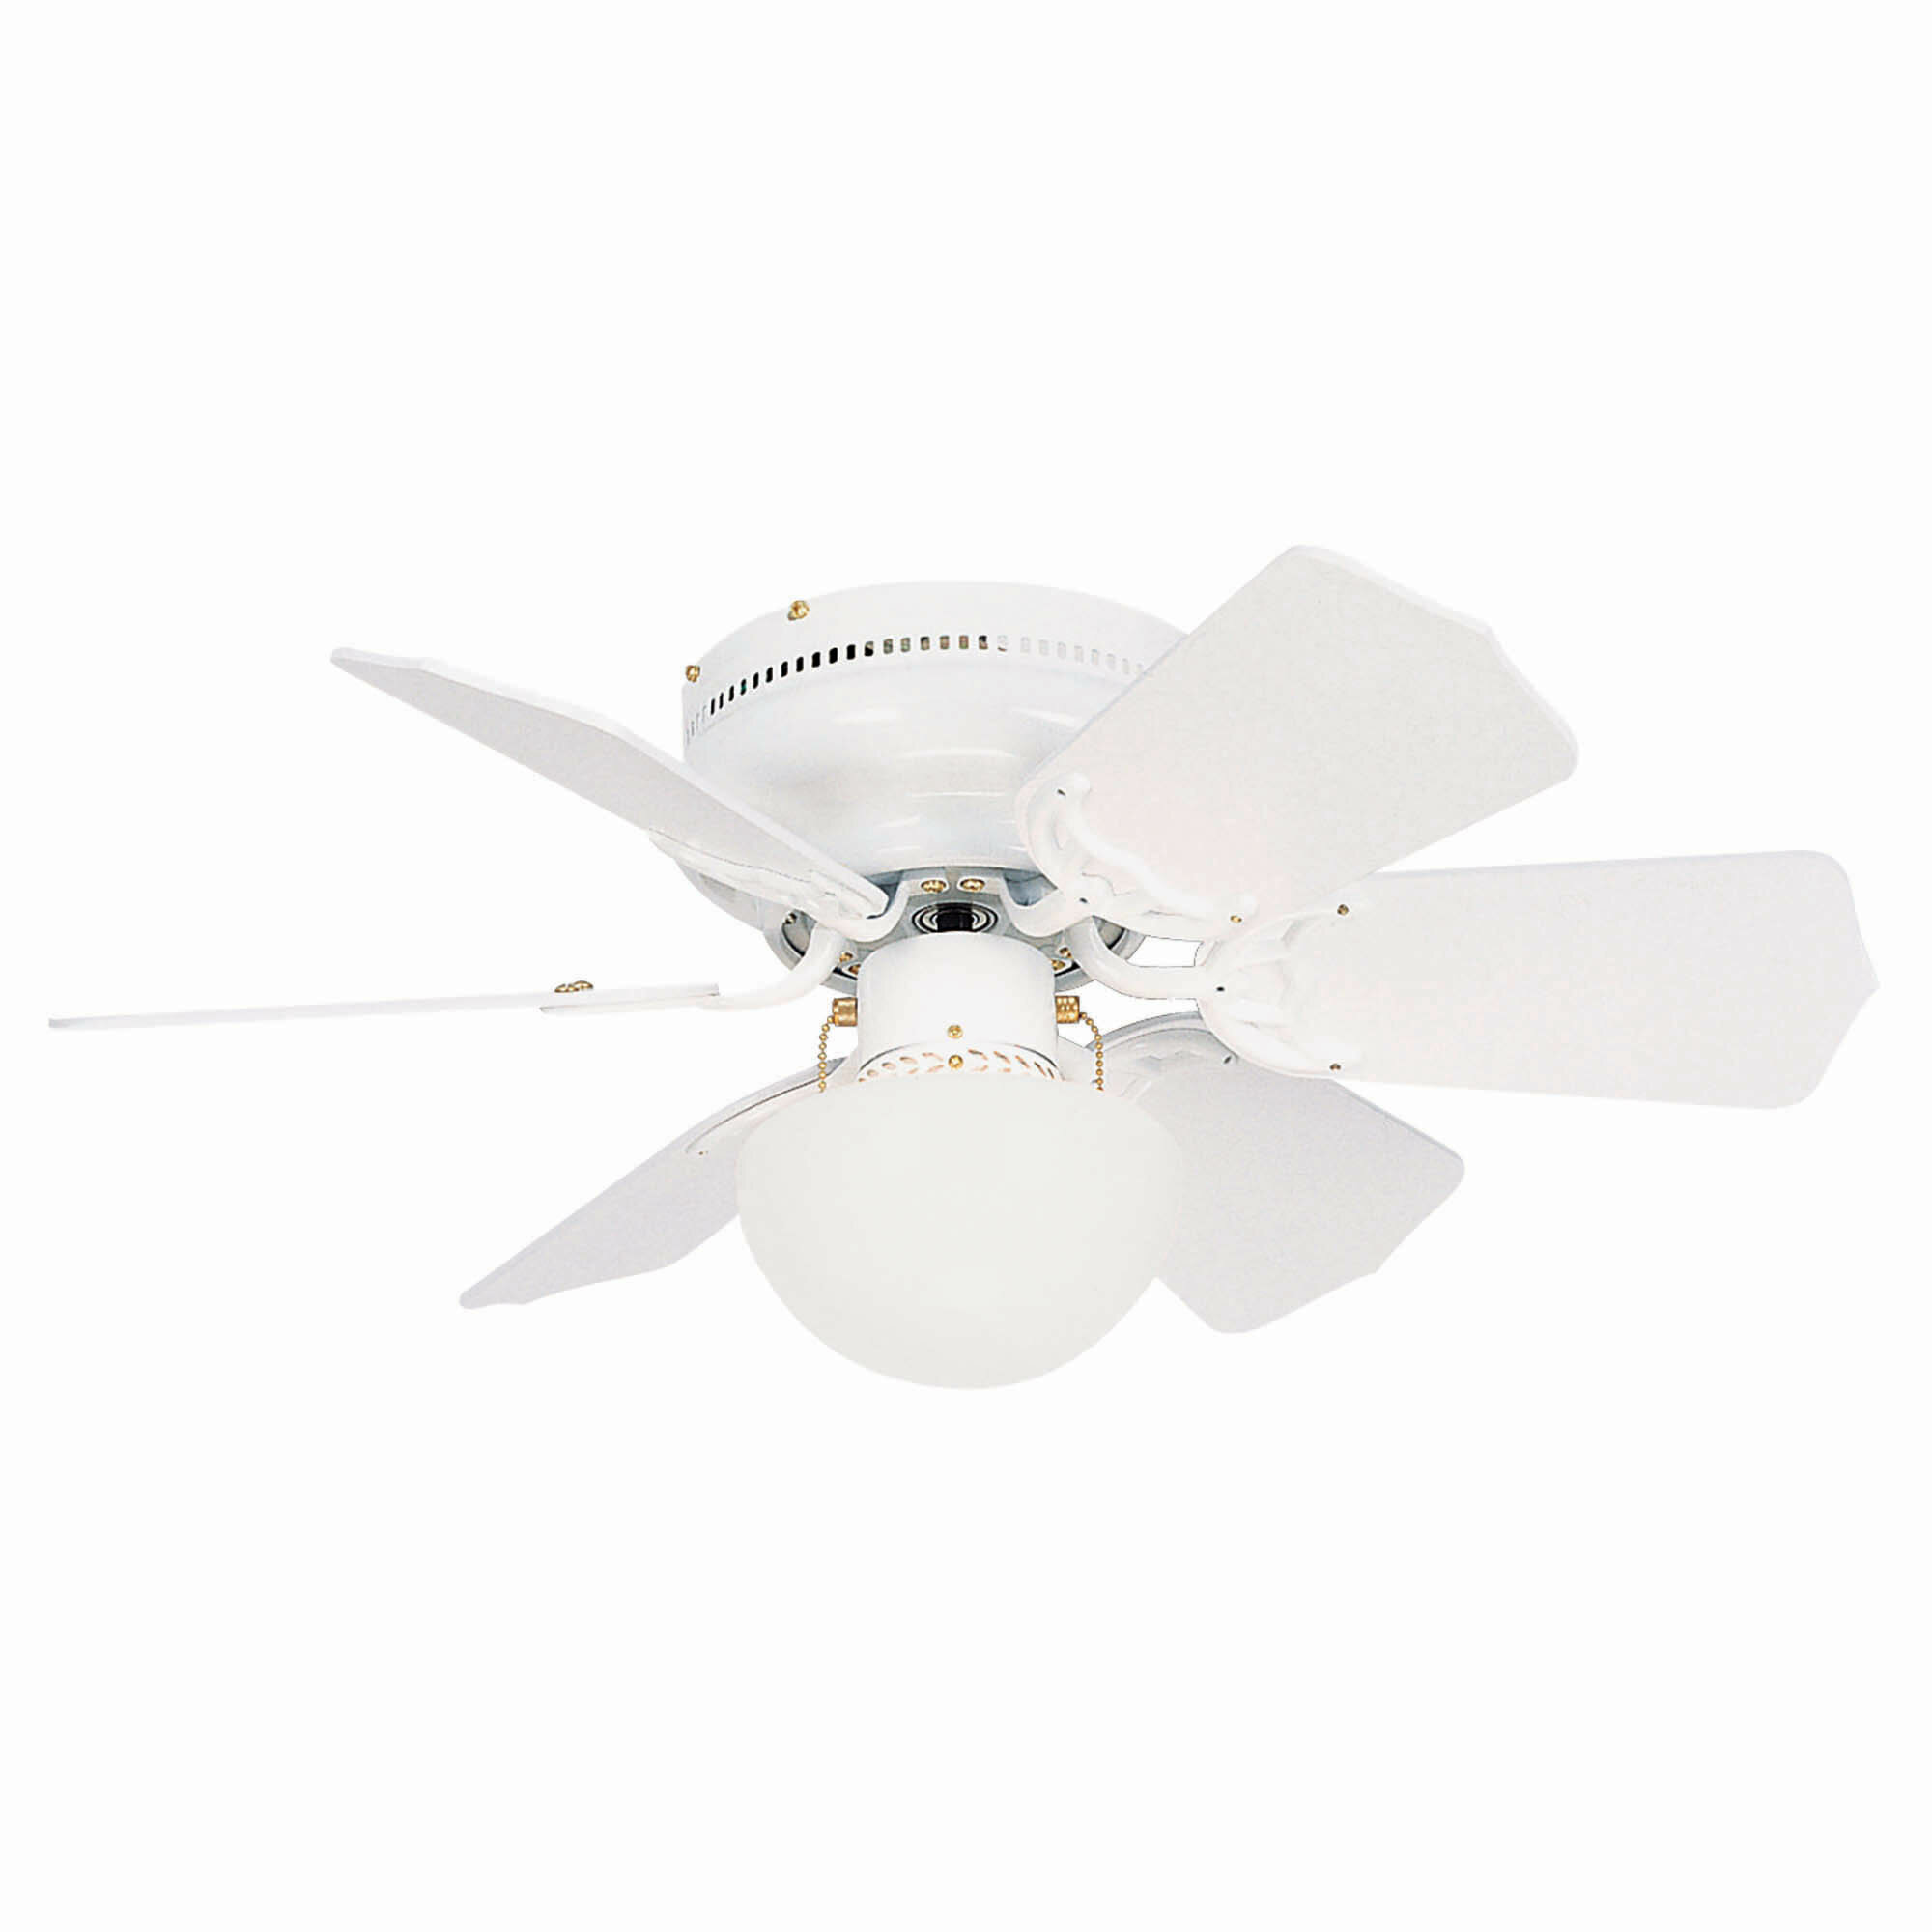 Andover Mills 30 Gatun 6 Blade Led Standard Ceiling Fan With Pull Chain And Light Kit Included Reviews Wayfair